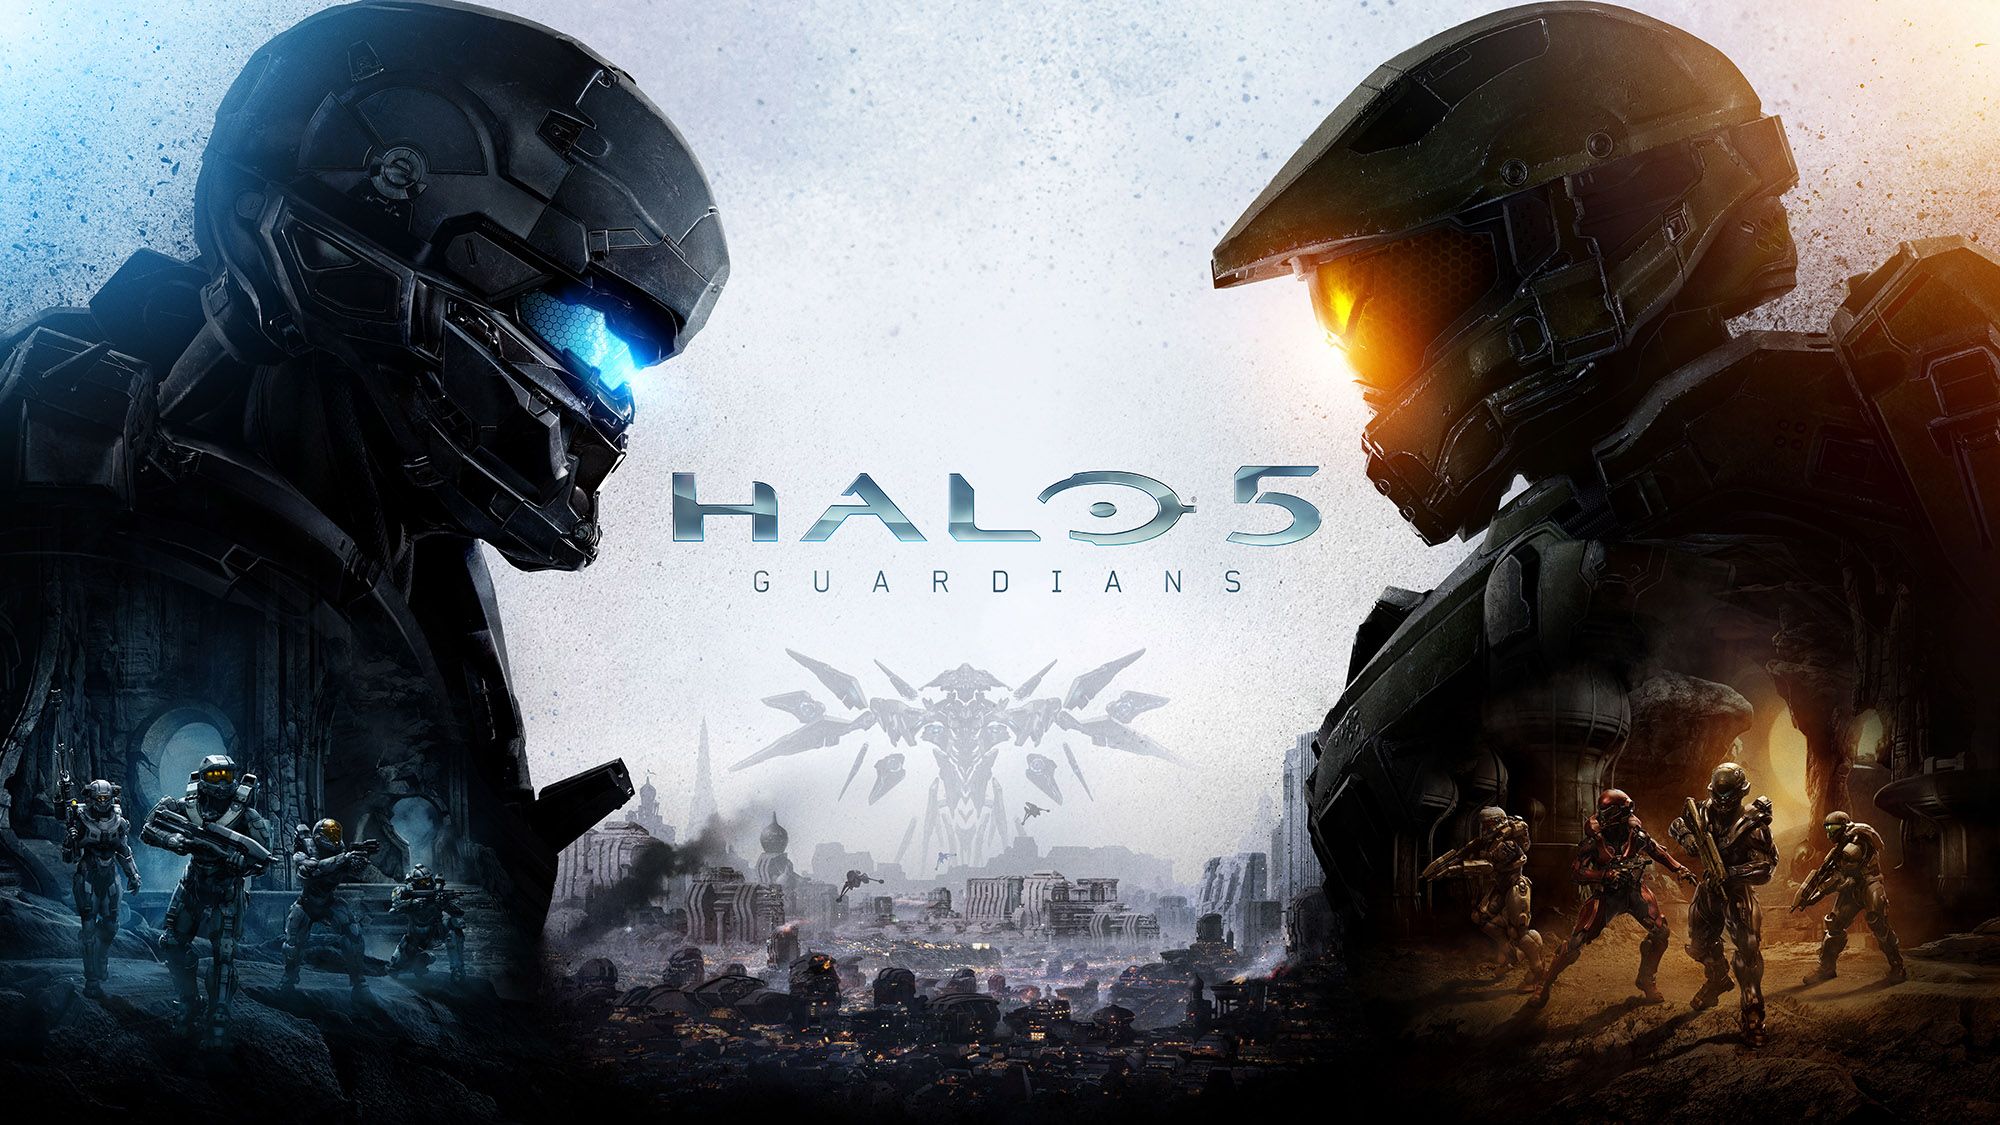 Halo 5: Guardians Story Campaign is Twice as Long as Halo 4